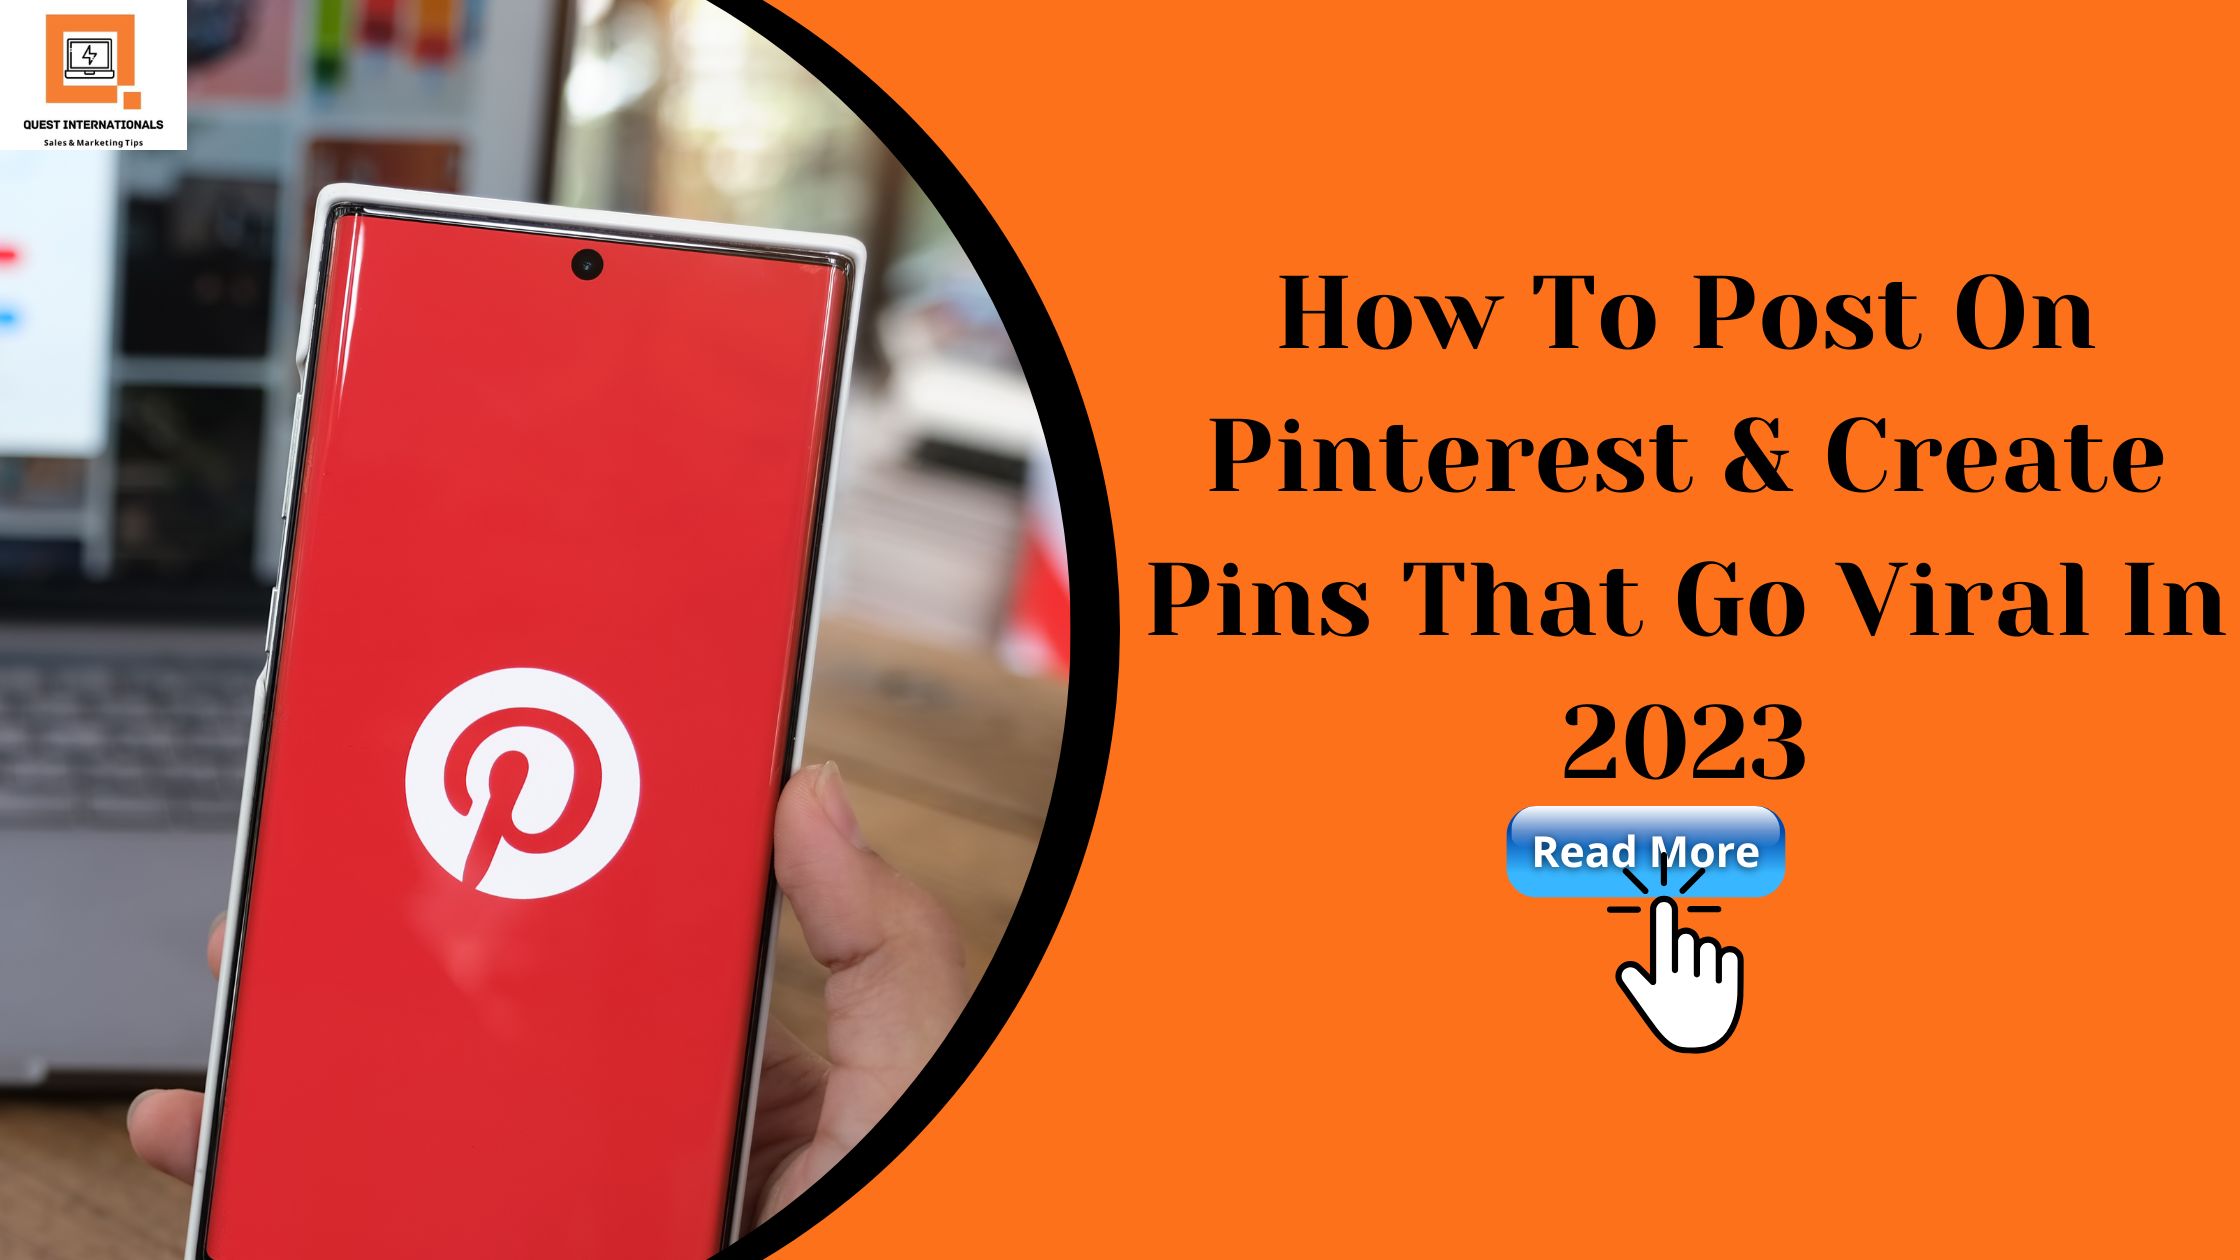 You are currently viewing How To Post On Pinterest & Create Pins That Go Viral In 2023